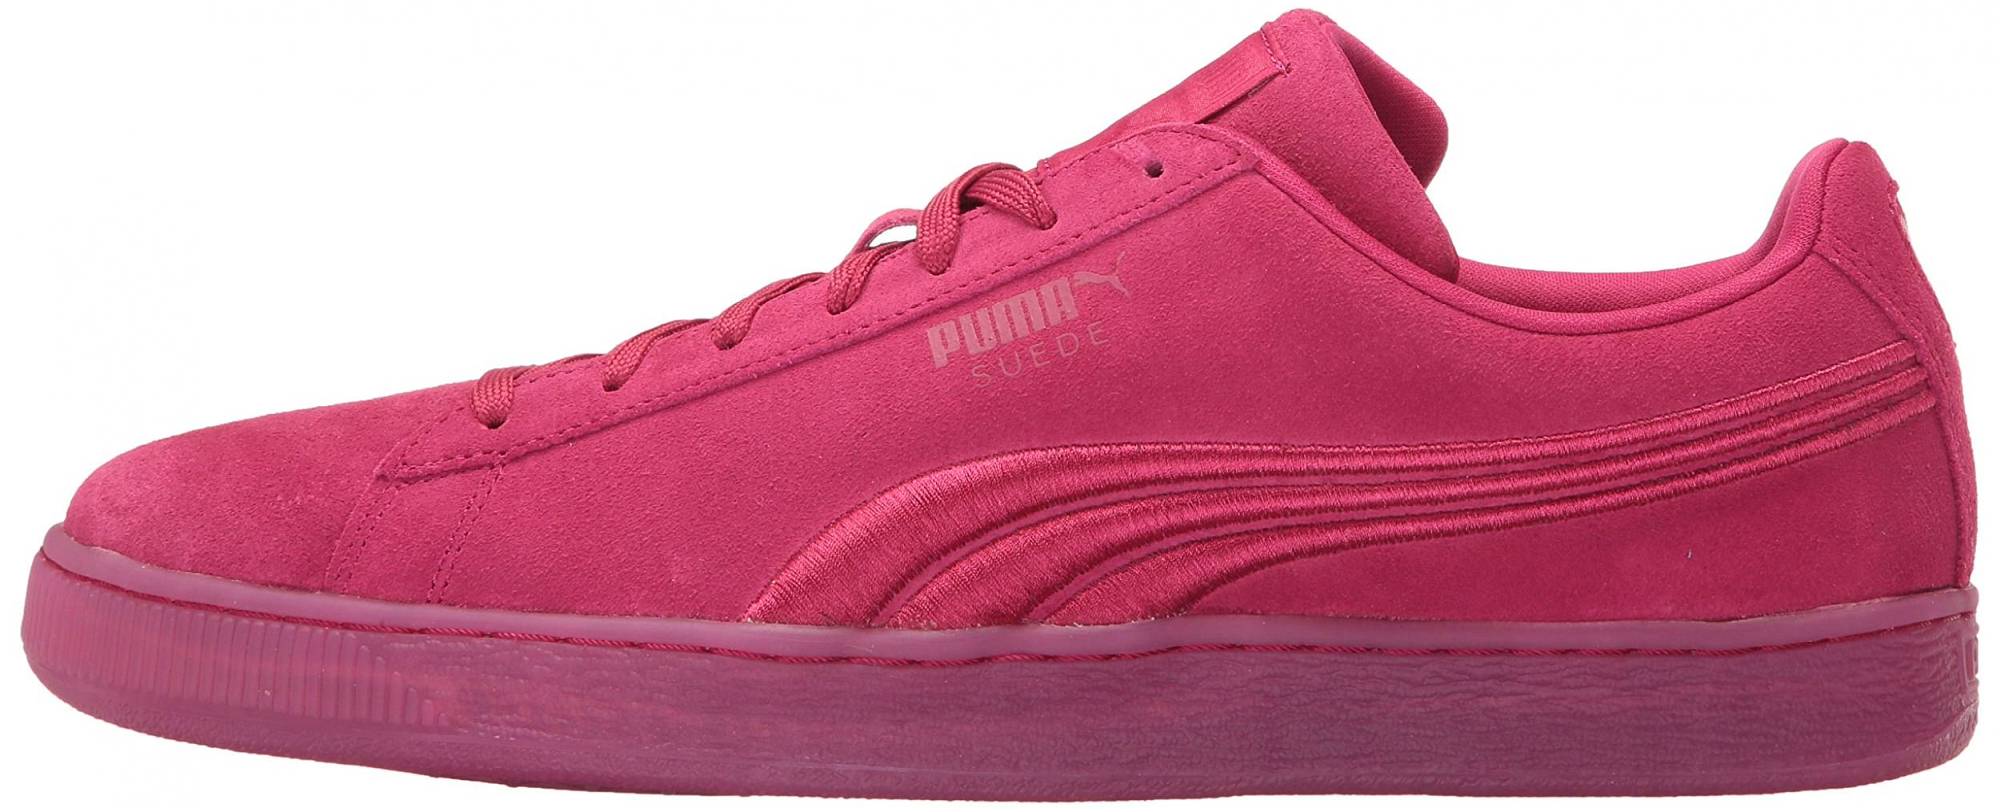 Puma Suede Classic Badge – Shoes Reviews & Reasons To Buy